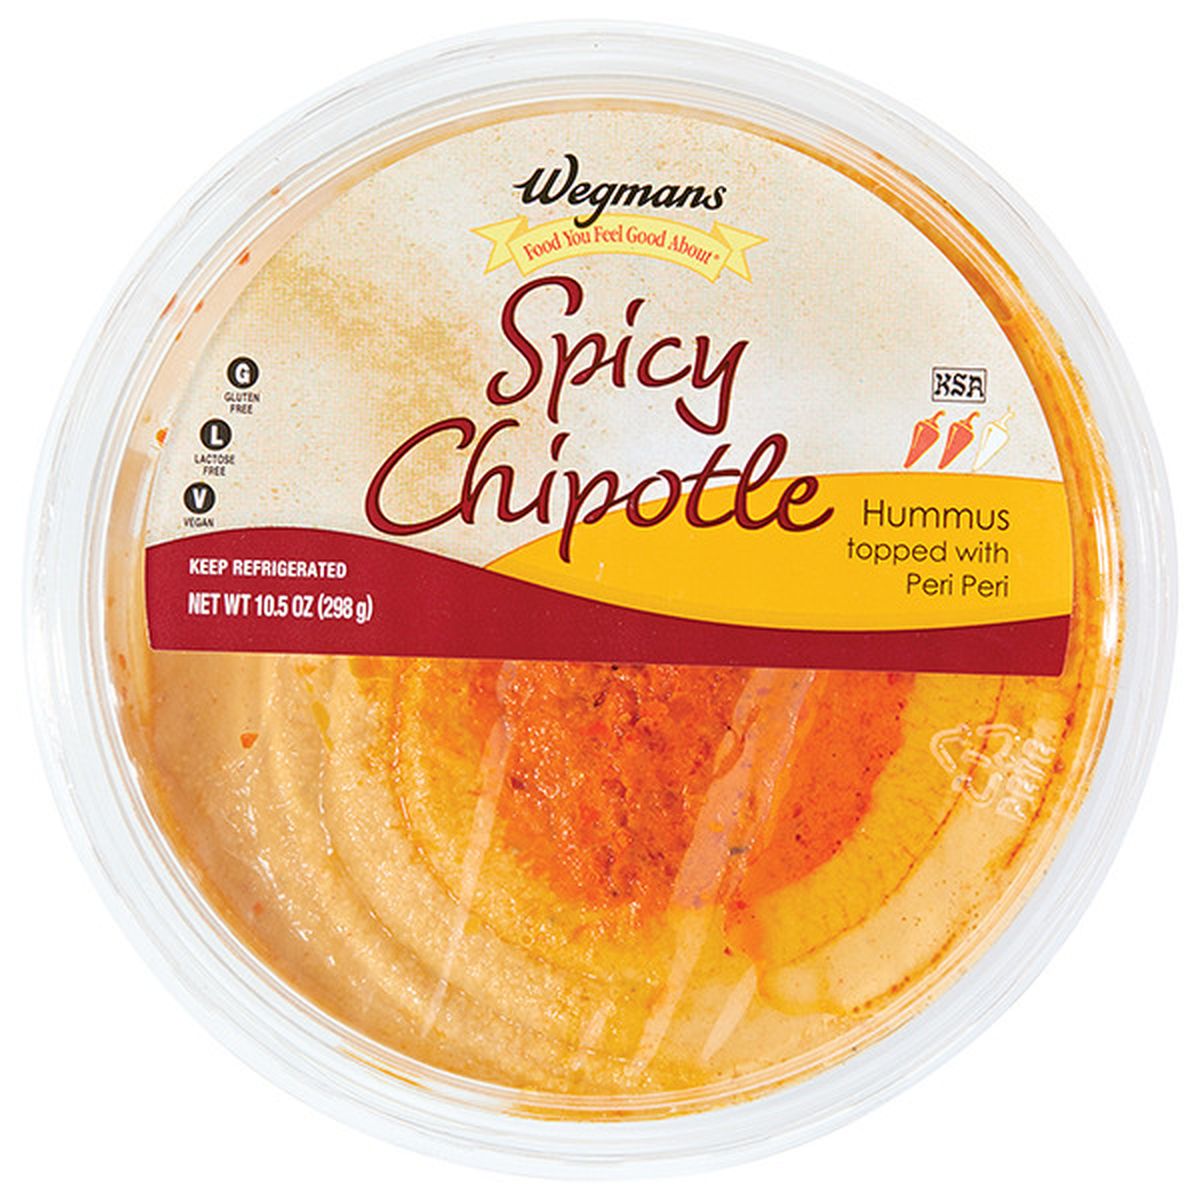 Calories in Wegmans Spicy Chipotle Hummus Topped with Peri Peri